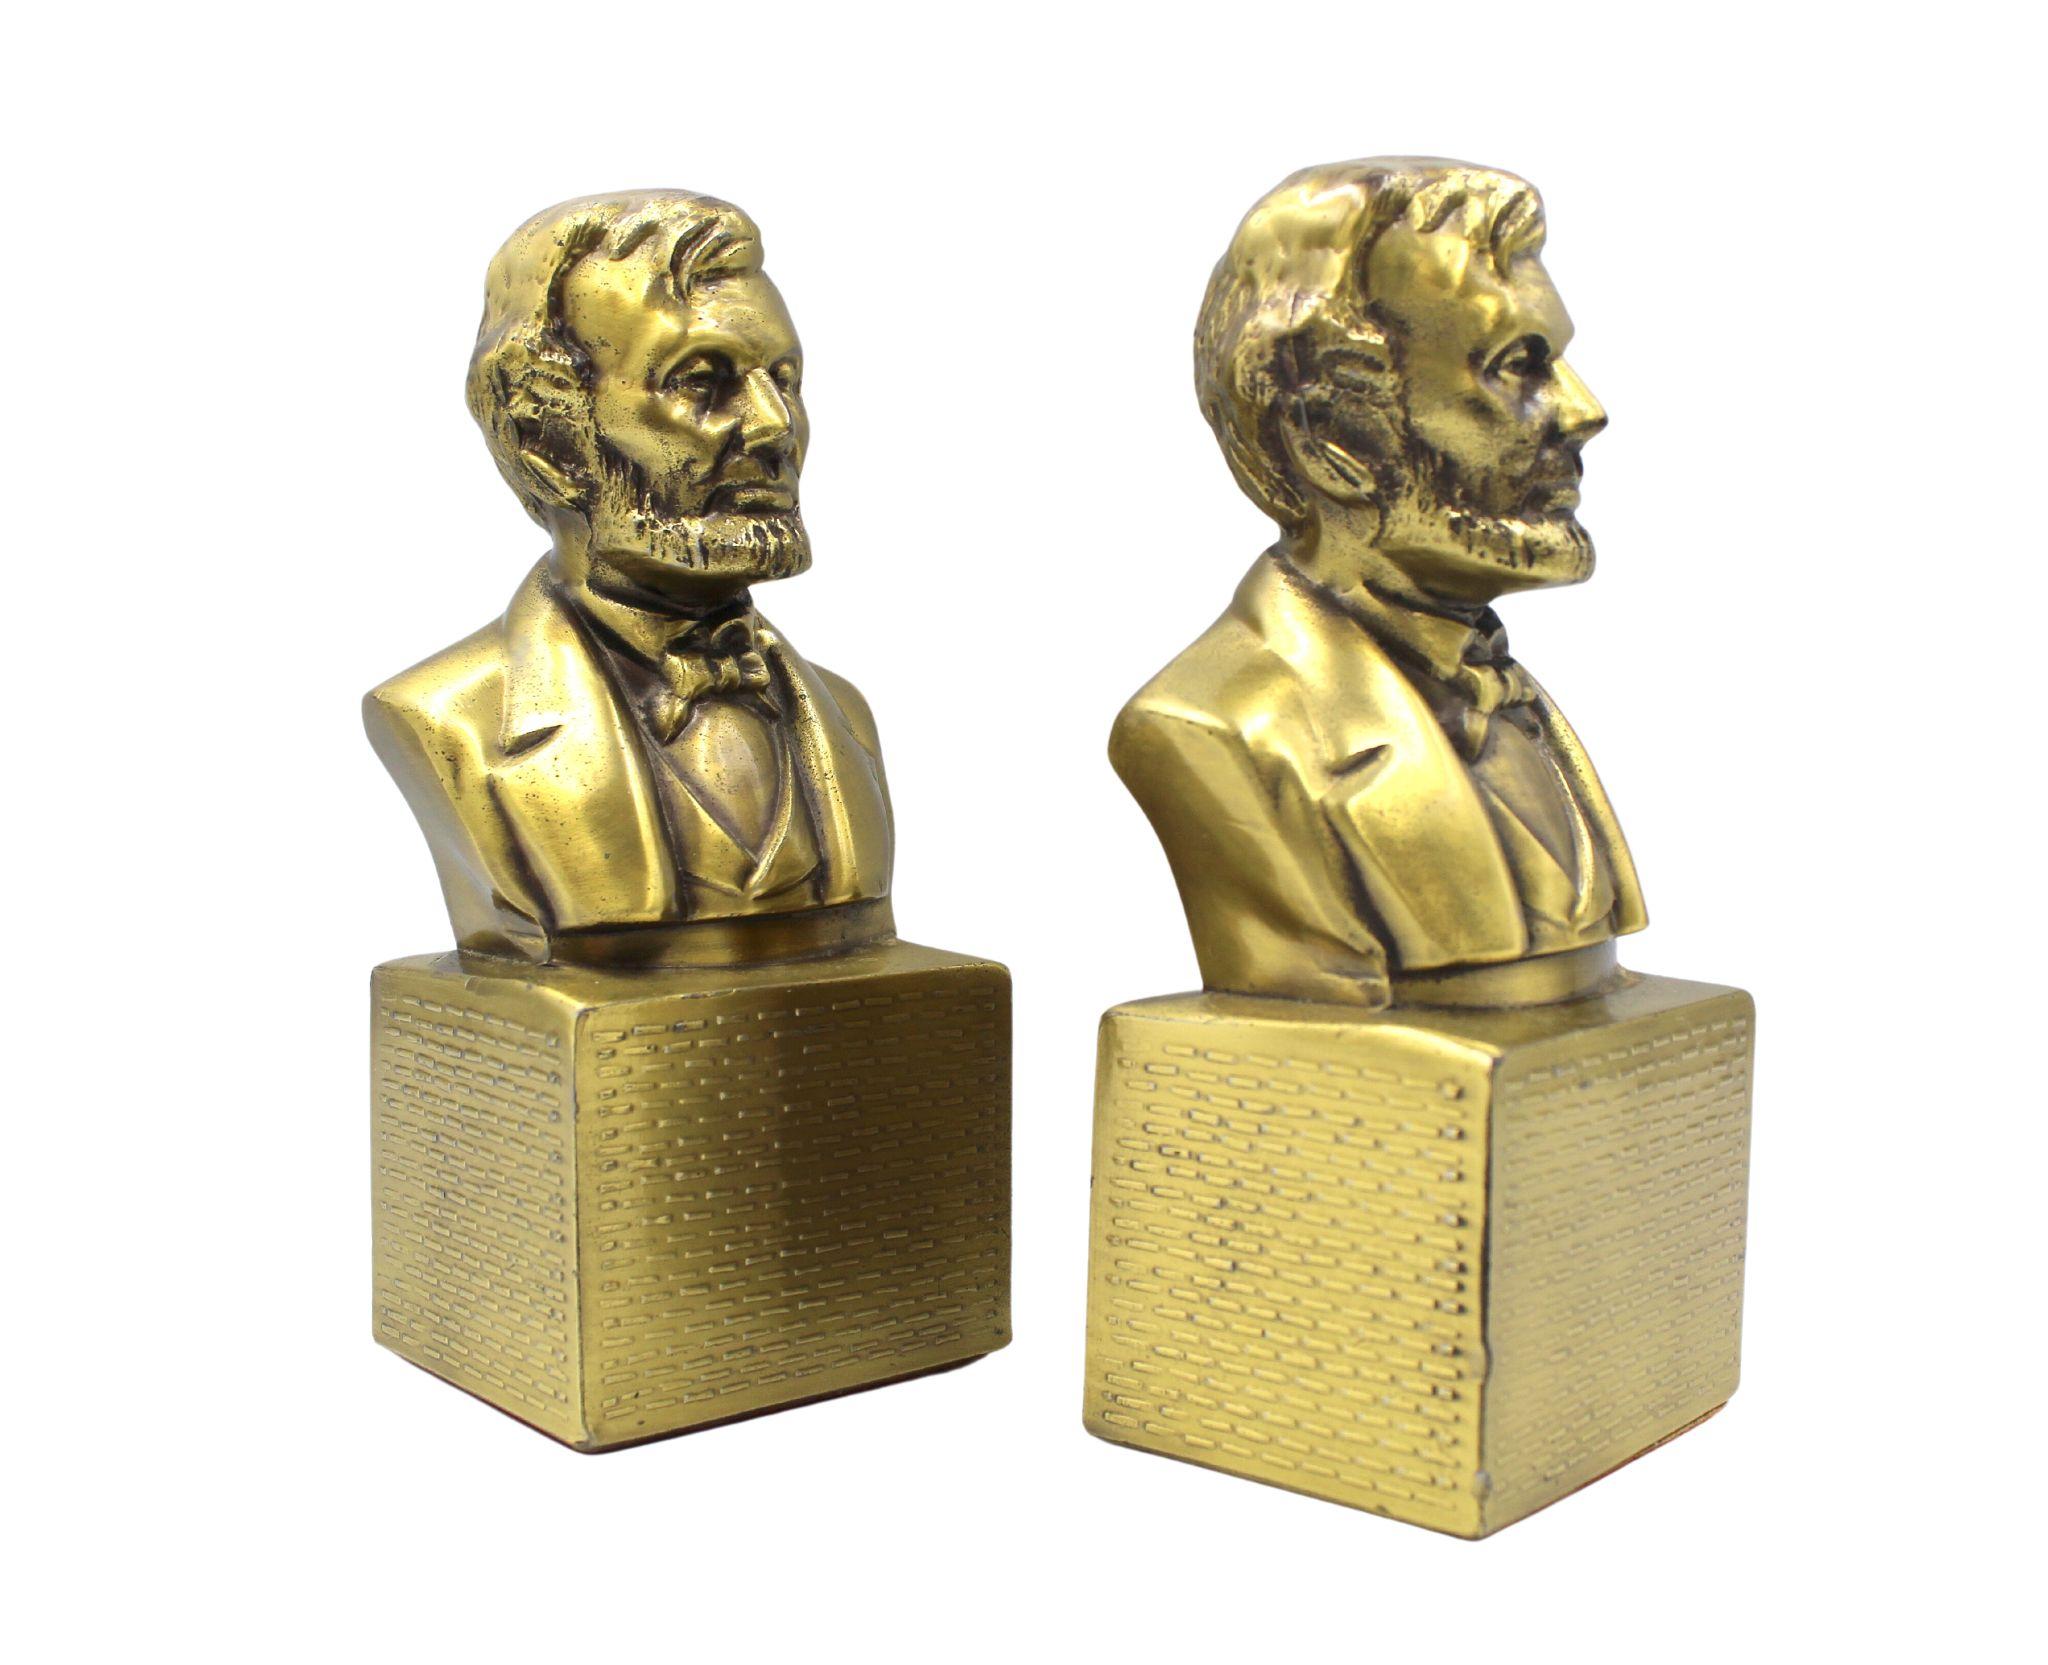 This is a pair of vintage Abraham Lincoln bust bookends. These bookends are made of brass and were produced by PM Craftsman in the U.S. On the base is a PM Craftsman label. The bookends depict President Abraham Lincoln, from head to shoulders, atop